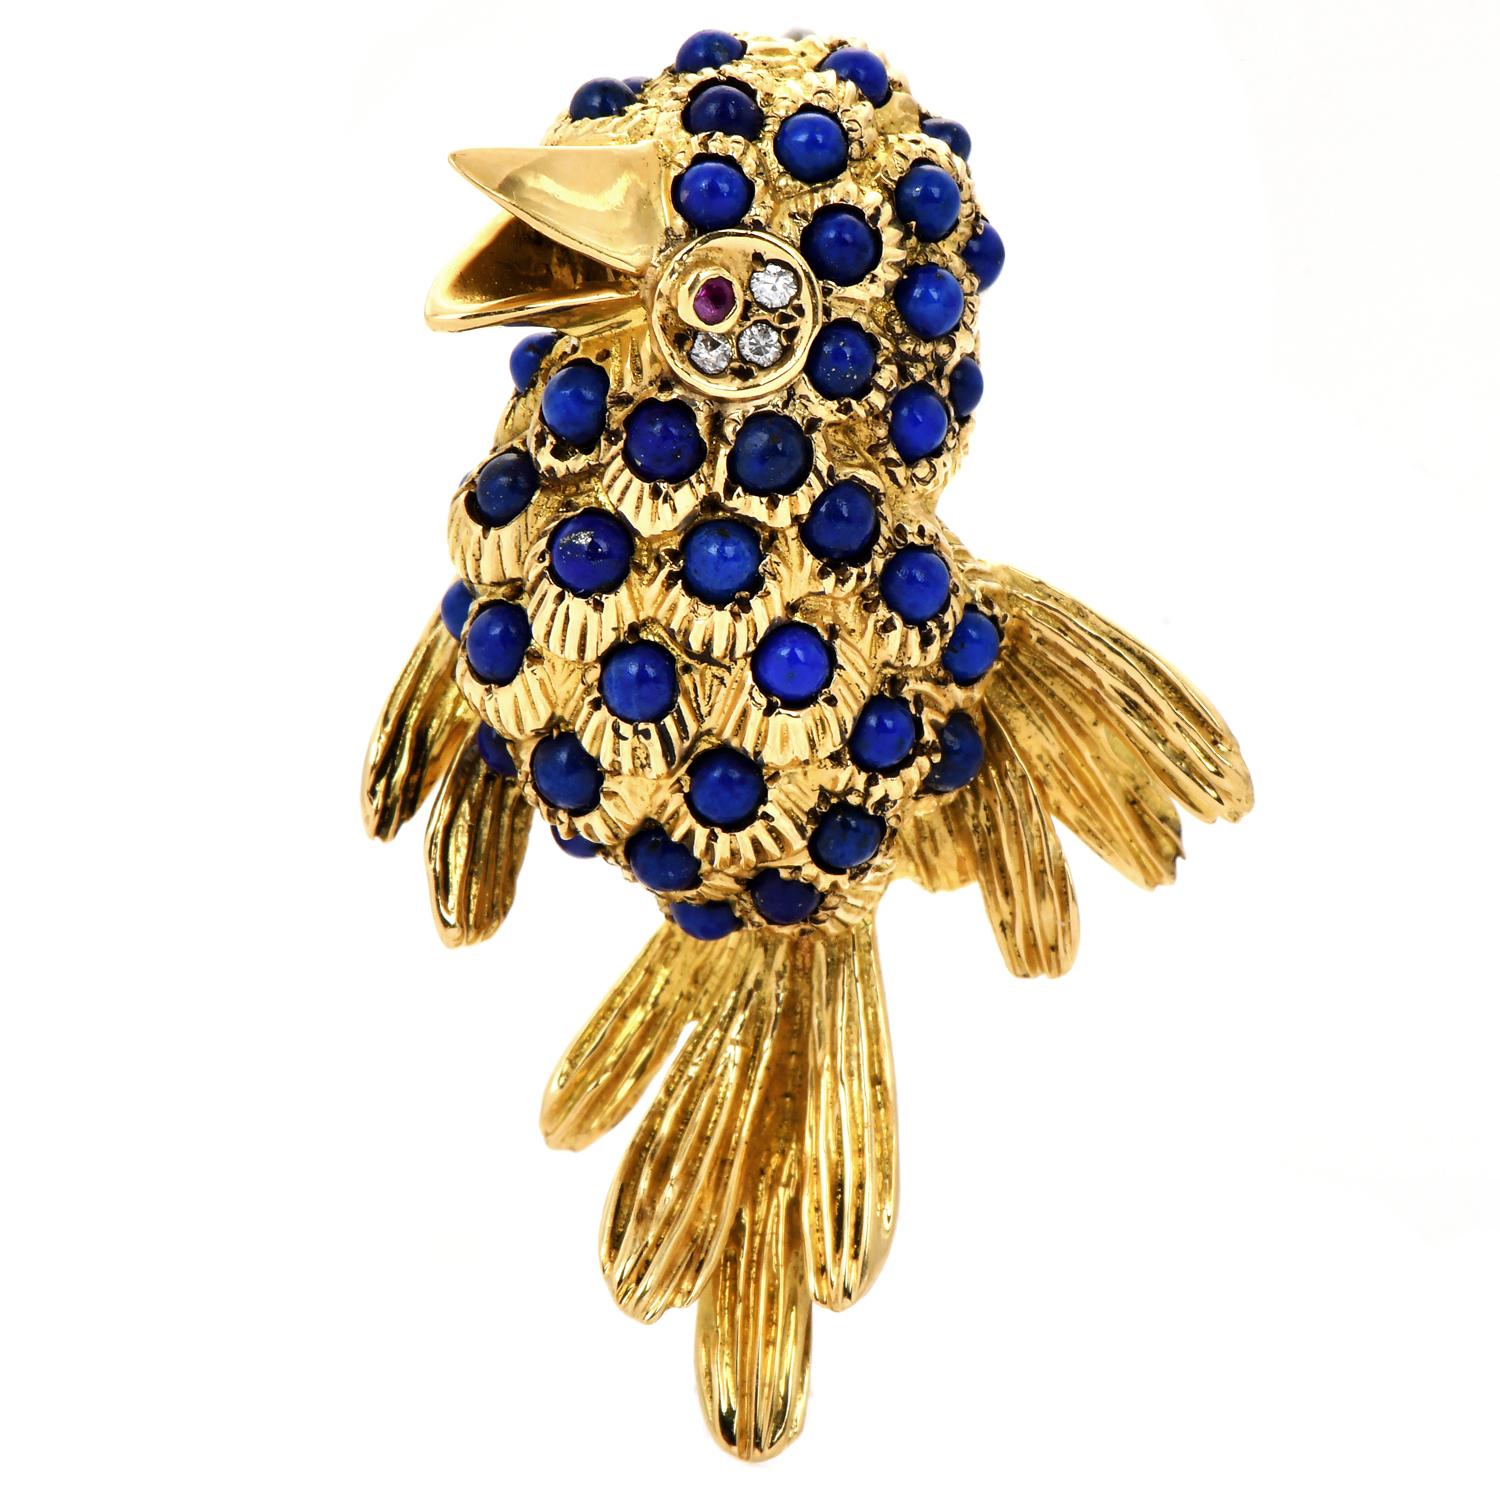 A  Vintage Blue Bird pin is crafted in solid 18K yellow gold.

The Eye is elaborated with 3 genuine pave set round fancy natural diamonds approx. 0.05 carats, and G-H color, VS clarity, and a red ruby approx. 0.01 carats

The body of the bird is